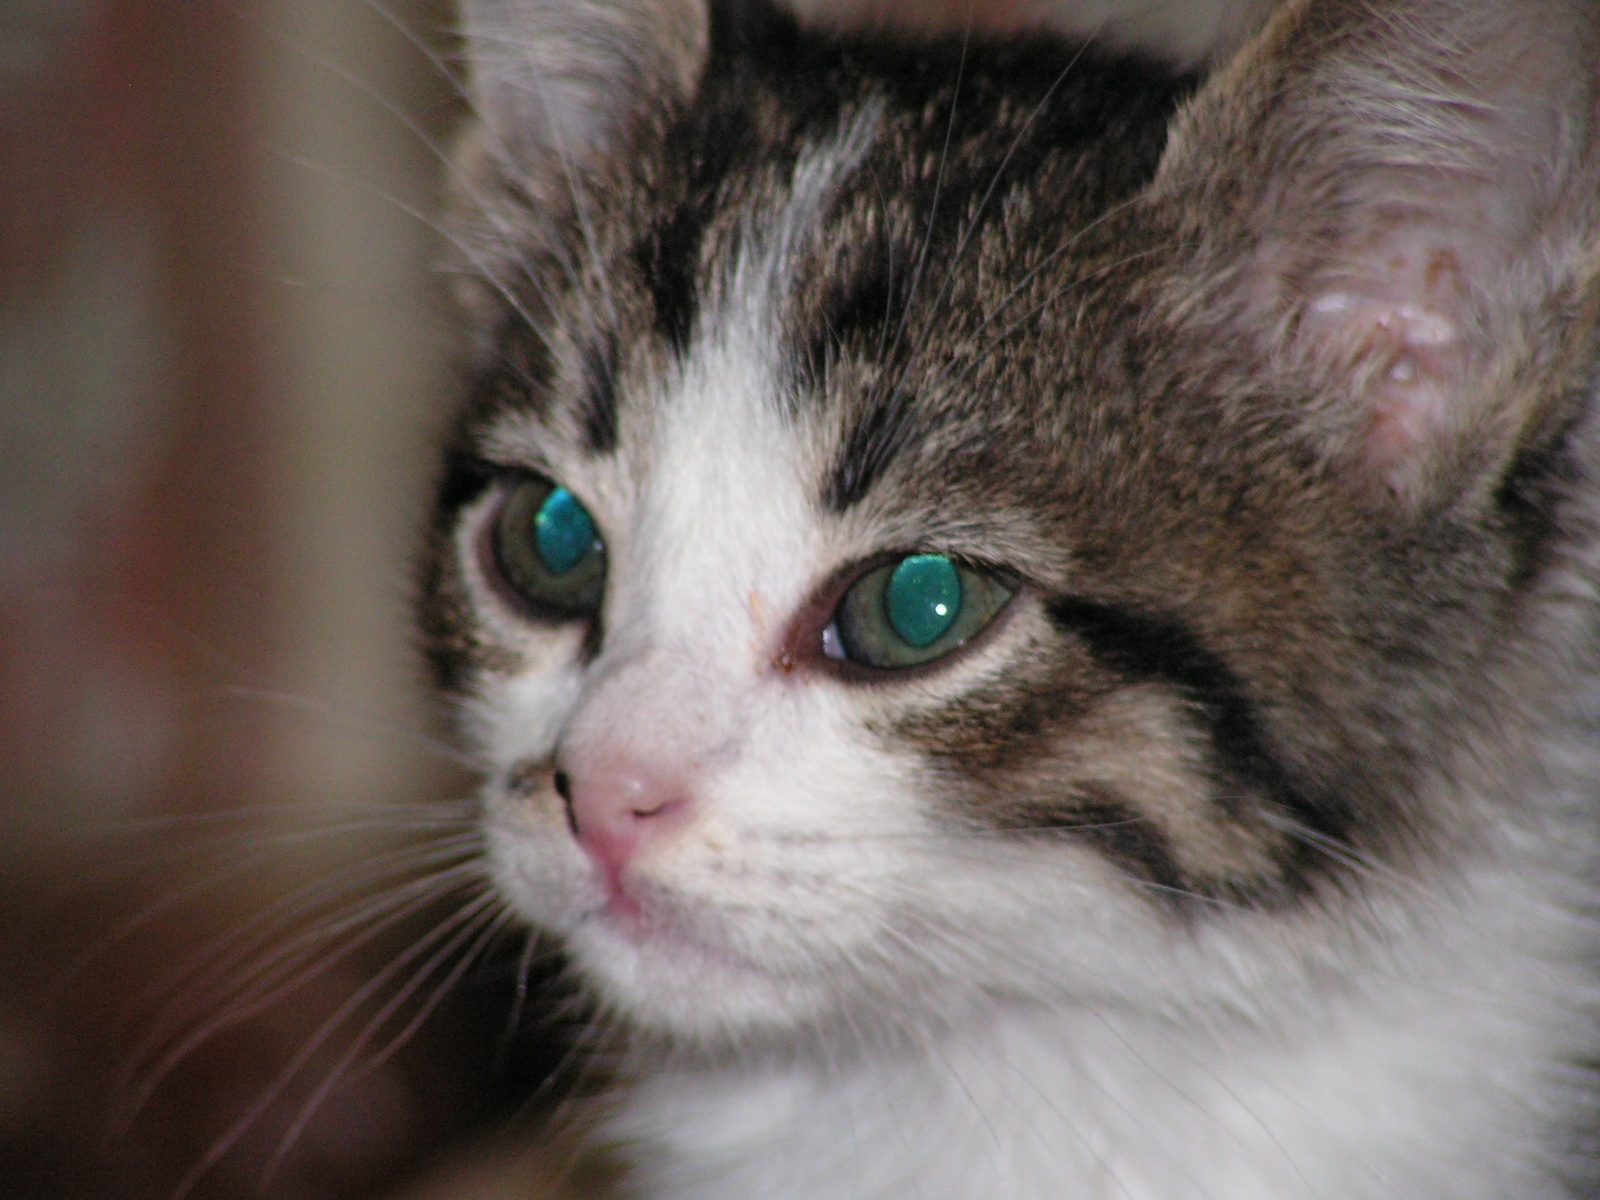 a close up of a cat with a blue and white kitten